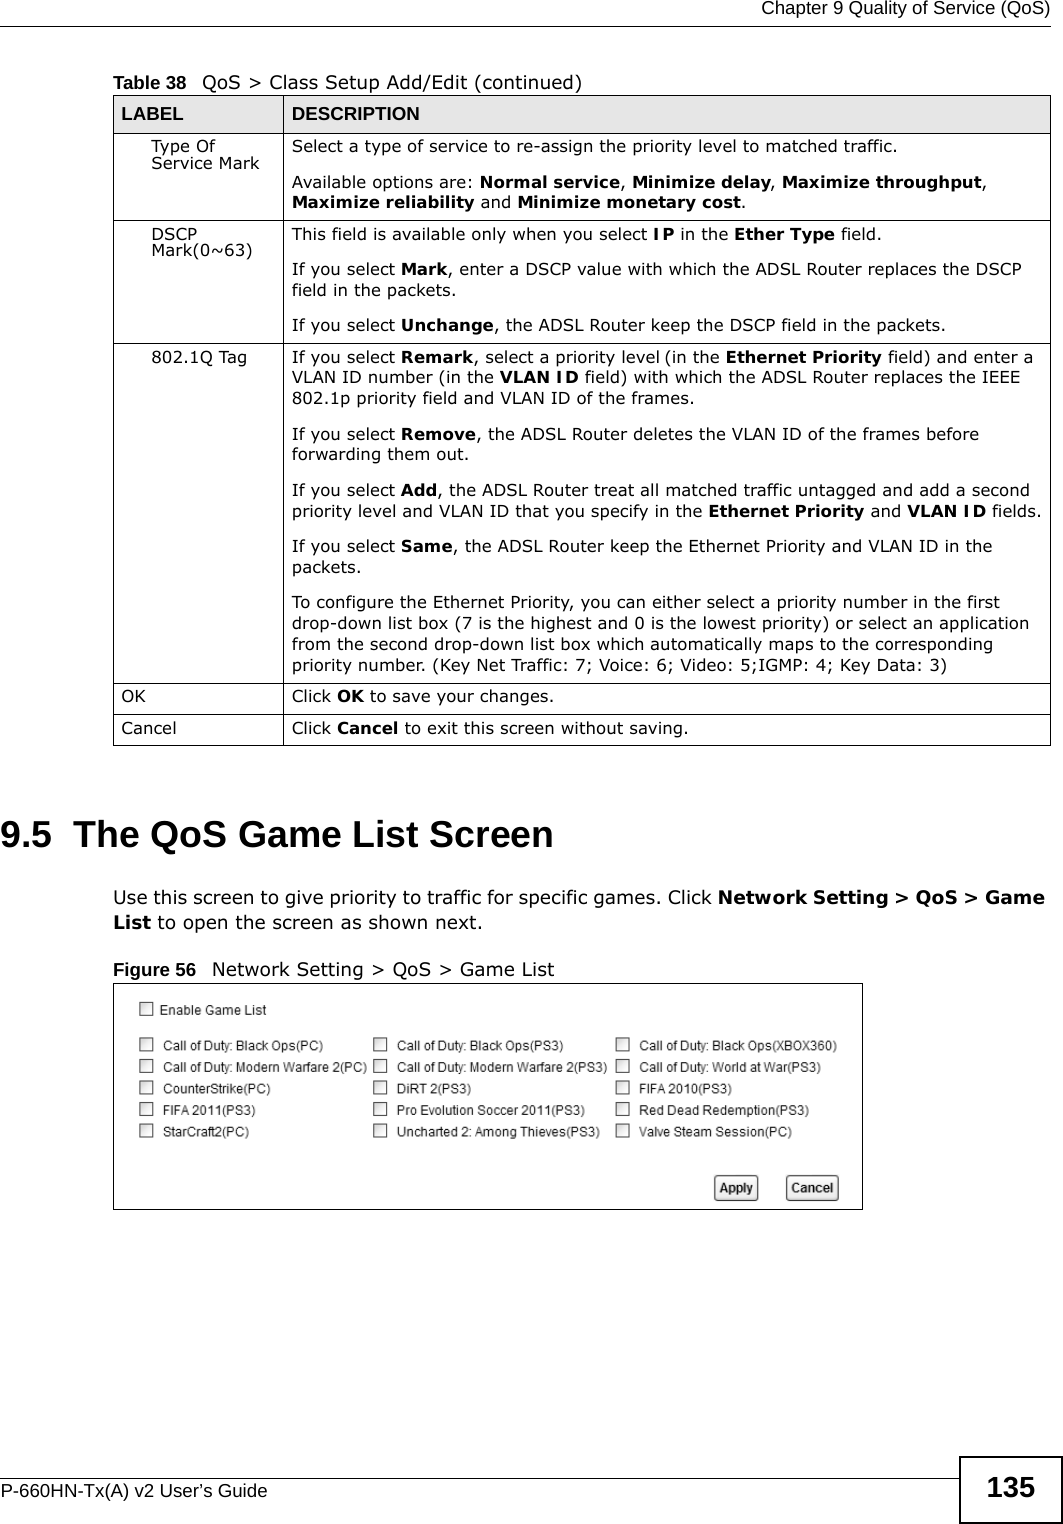  Chapter 9 Quality of Service (QoS)P-660HN-Tx(A) v2 User’s Guide 1359.5  The QoS Game List Screen Use this screen to give priority to traffic for specific games. Click Network Setting &gt; QoS &gt; Game List to open the screen as shown next.Figure 56   Network Setting &gt; QoS &gt; Game ListType Of Service Mark Select a type of service to re-assign the priority level to matched traffic.Available options are: Normal service, Minimize delay, Maximize throughput, Maximize reliability and Minimize monetary cost.DSCP Mark(0~63) This field is available only when you select IP in the Ether Type field.If you select Mark, enter a DSCP value with which the ADSL Router replaces the DSCP field in the packets.If you select Unchange, the ADSL Router keep the DSCP field in the packets.802.1Q Tag If you select Remark, select a priority level (in the Ethernet Priority field) and enter a VLAN ID number (in the VLAN ID field) with which the ADSL Router replaces the IEEE 802.1p priority field and VLAN ID of the frames.If you select Remove, the ADSL Router deletes the VLAN ID of the frames before forwarding them out.If you select Add, the ADSL Router treat all matched traffic untagged and add a second priority level and VLAN ID that you specify in the Ethernet Priority and VLAN ID fields.If you select Same, the ADSL Router keep the Ethernet Priority and VLAN ID in the packets.To configure the Ethernet Priority, you can either select a priority number in the first drop-down list box (7 is the highest and 0 is the lowest priority) or select an application from the second drop-down list box which automatically maps to the corresponding priority number. (Key Net Traffic: 7; Voice: 6; Video: 5;IGMP: 4; Key Data: 3)OK Click OK to save your changes.Cancel Click Cancel to exit this screen without saving.Table 38   QoS &gt; Class Setup Add/Edit (continued)LABEL DESCRIPTION